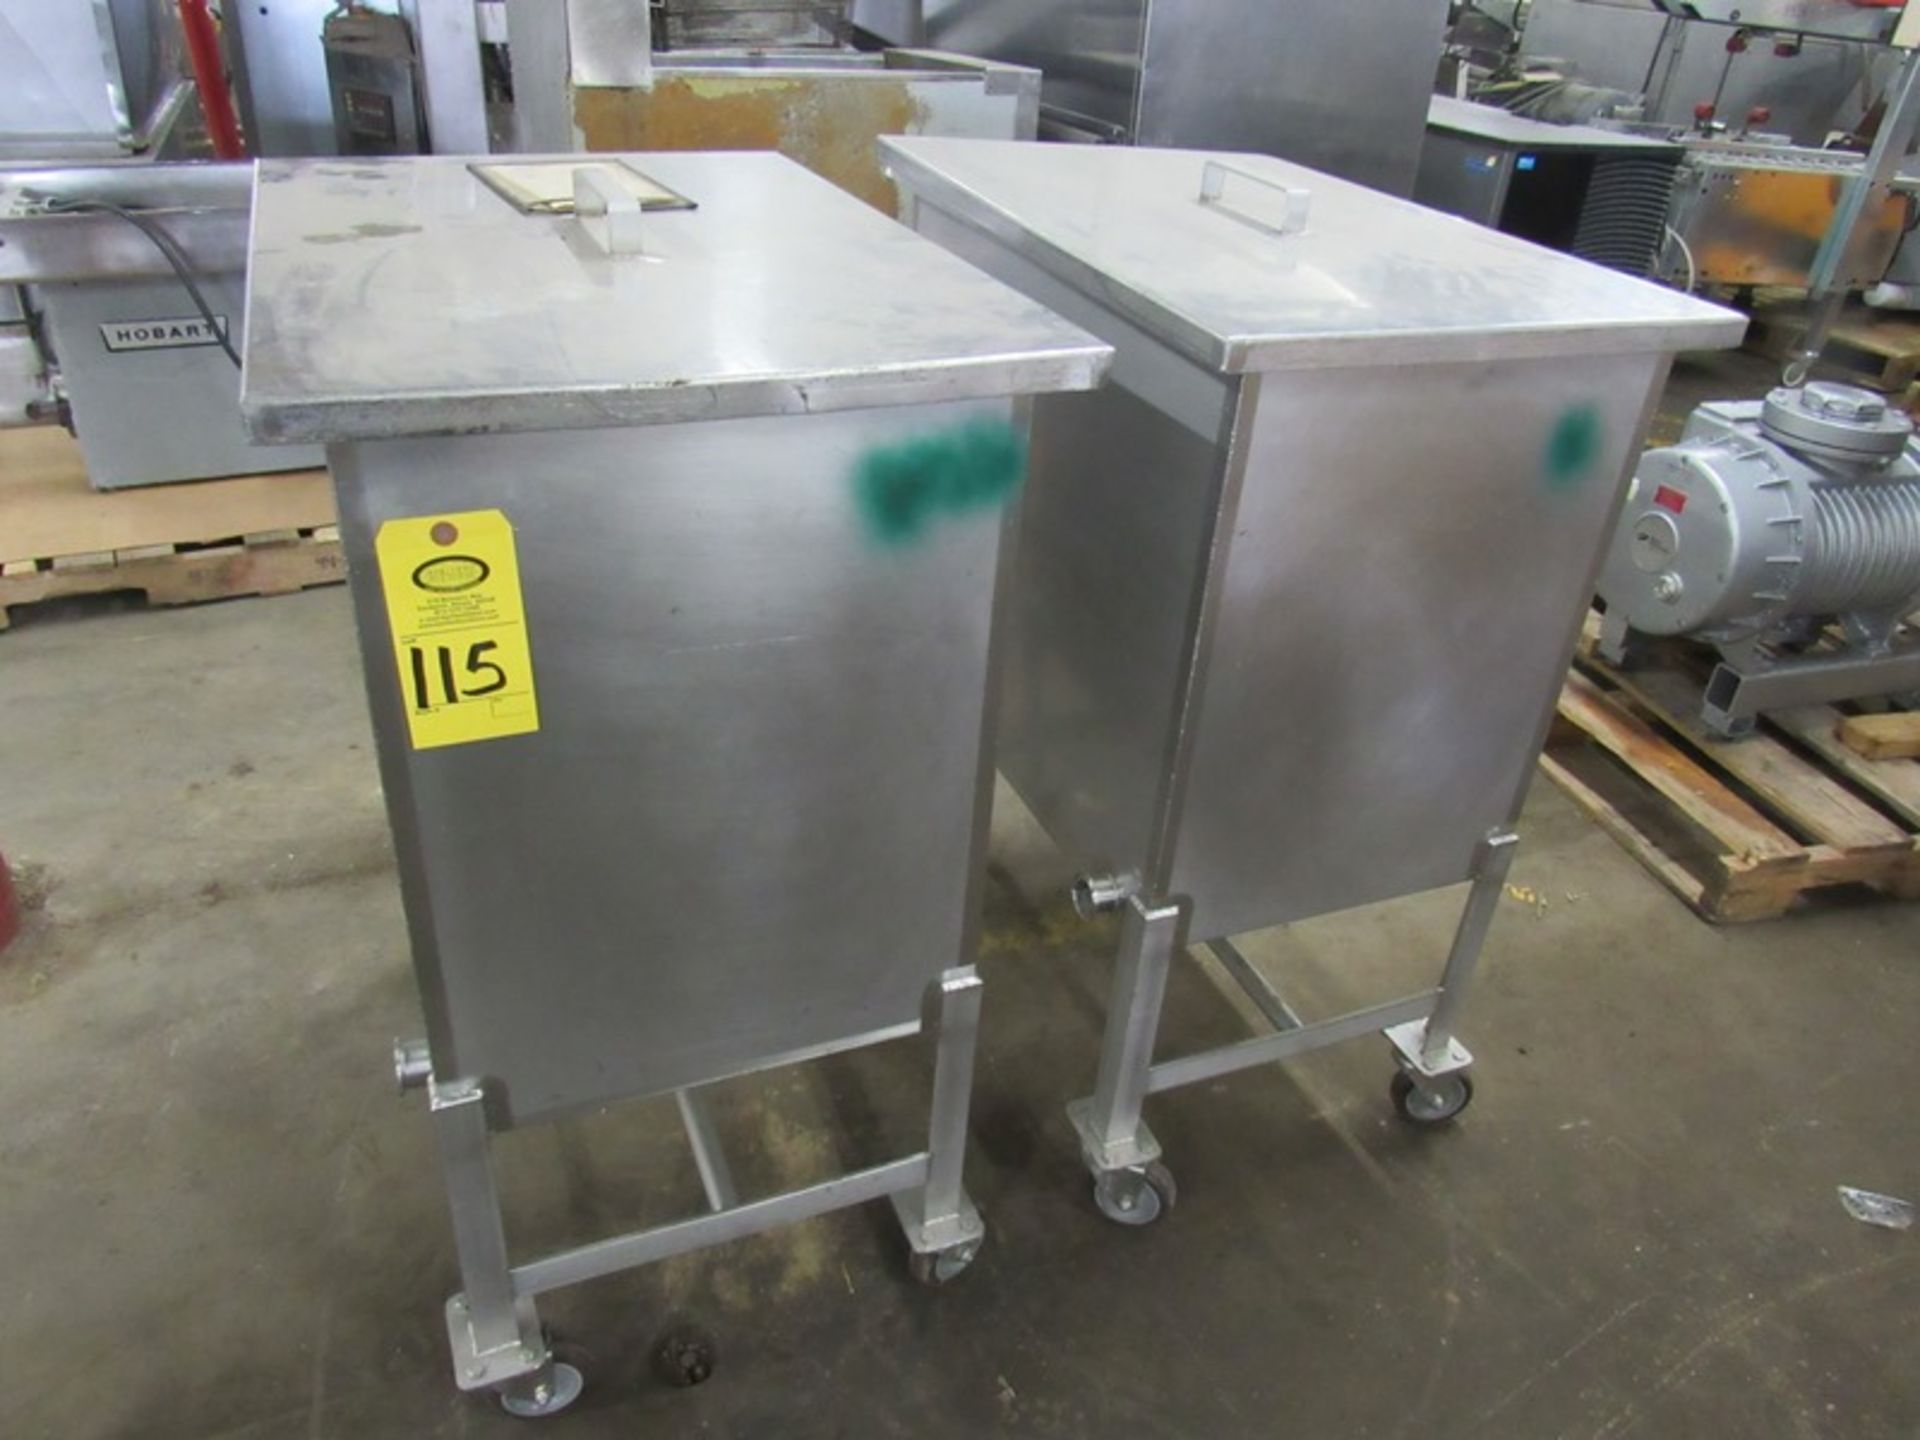 Stainless Steel Portable Tanks, 18" W X 28" L X 24" D, bottom side drain with screen and top (